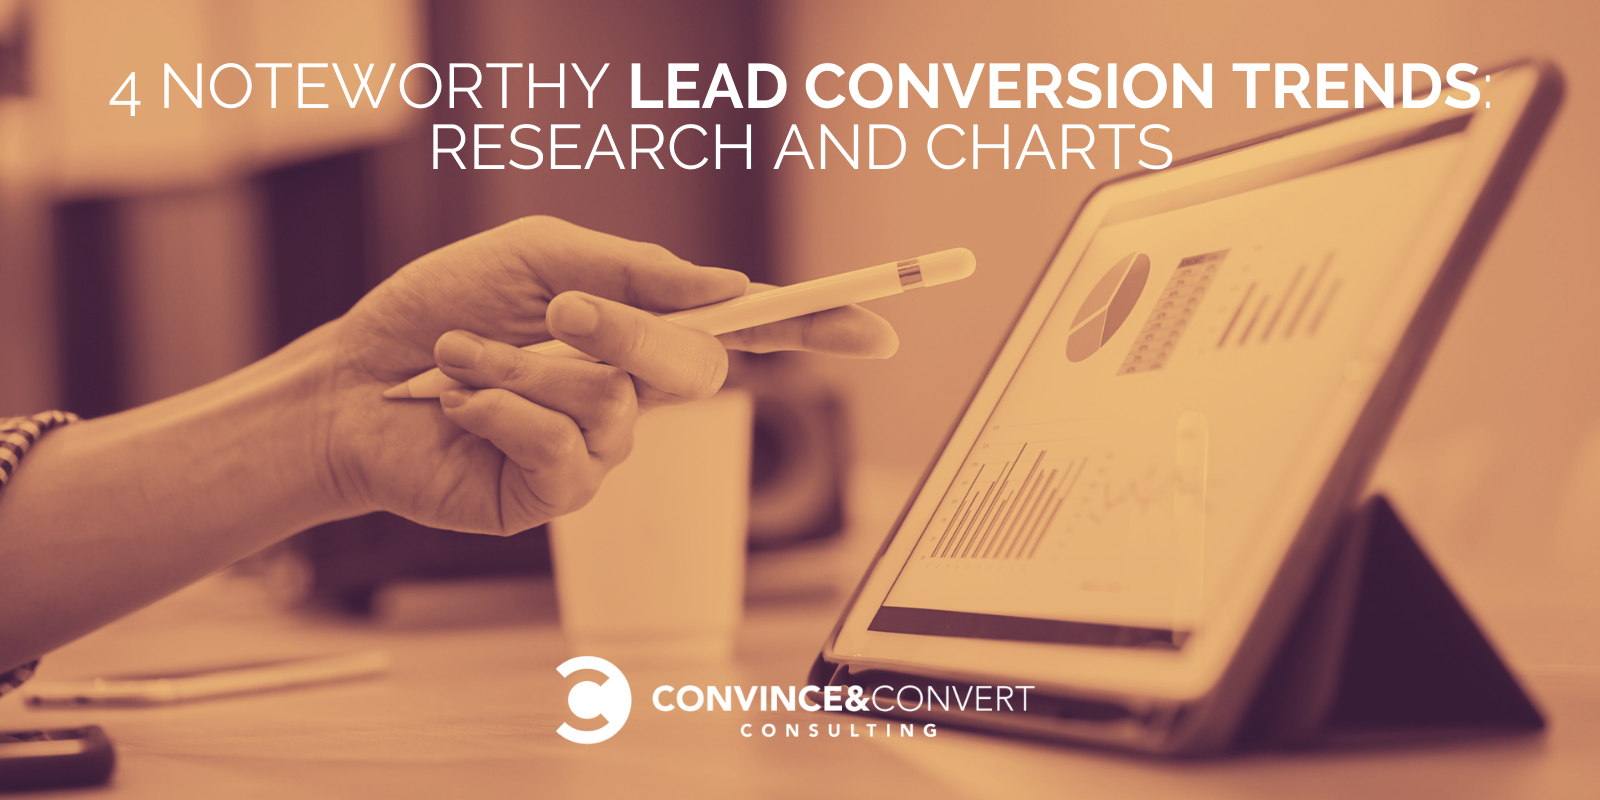 4 Noteworthy Lead Conversion Trends: Research and Charts